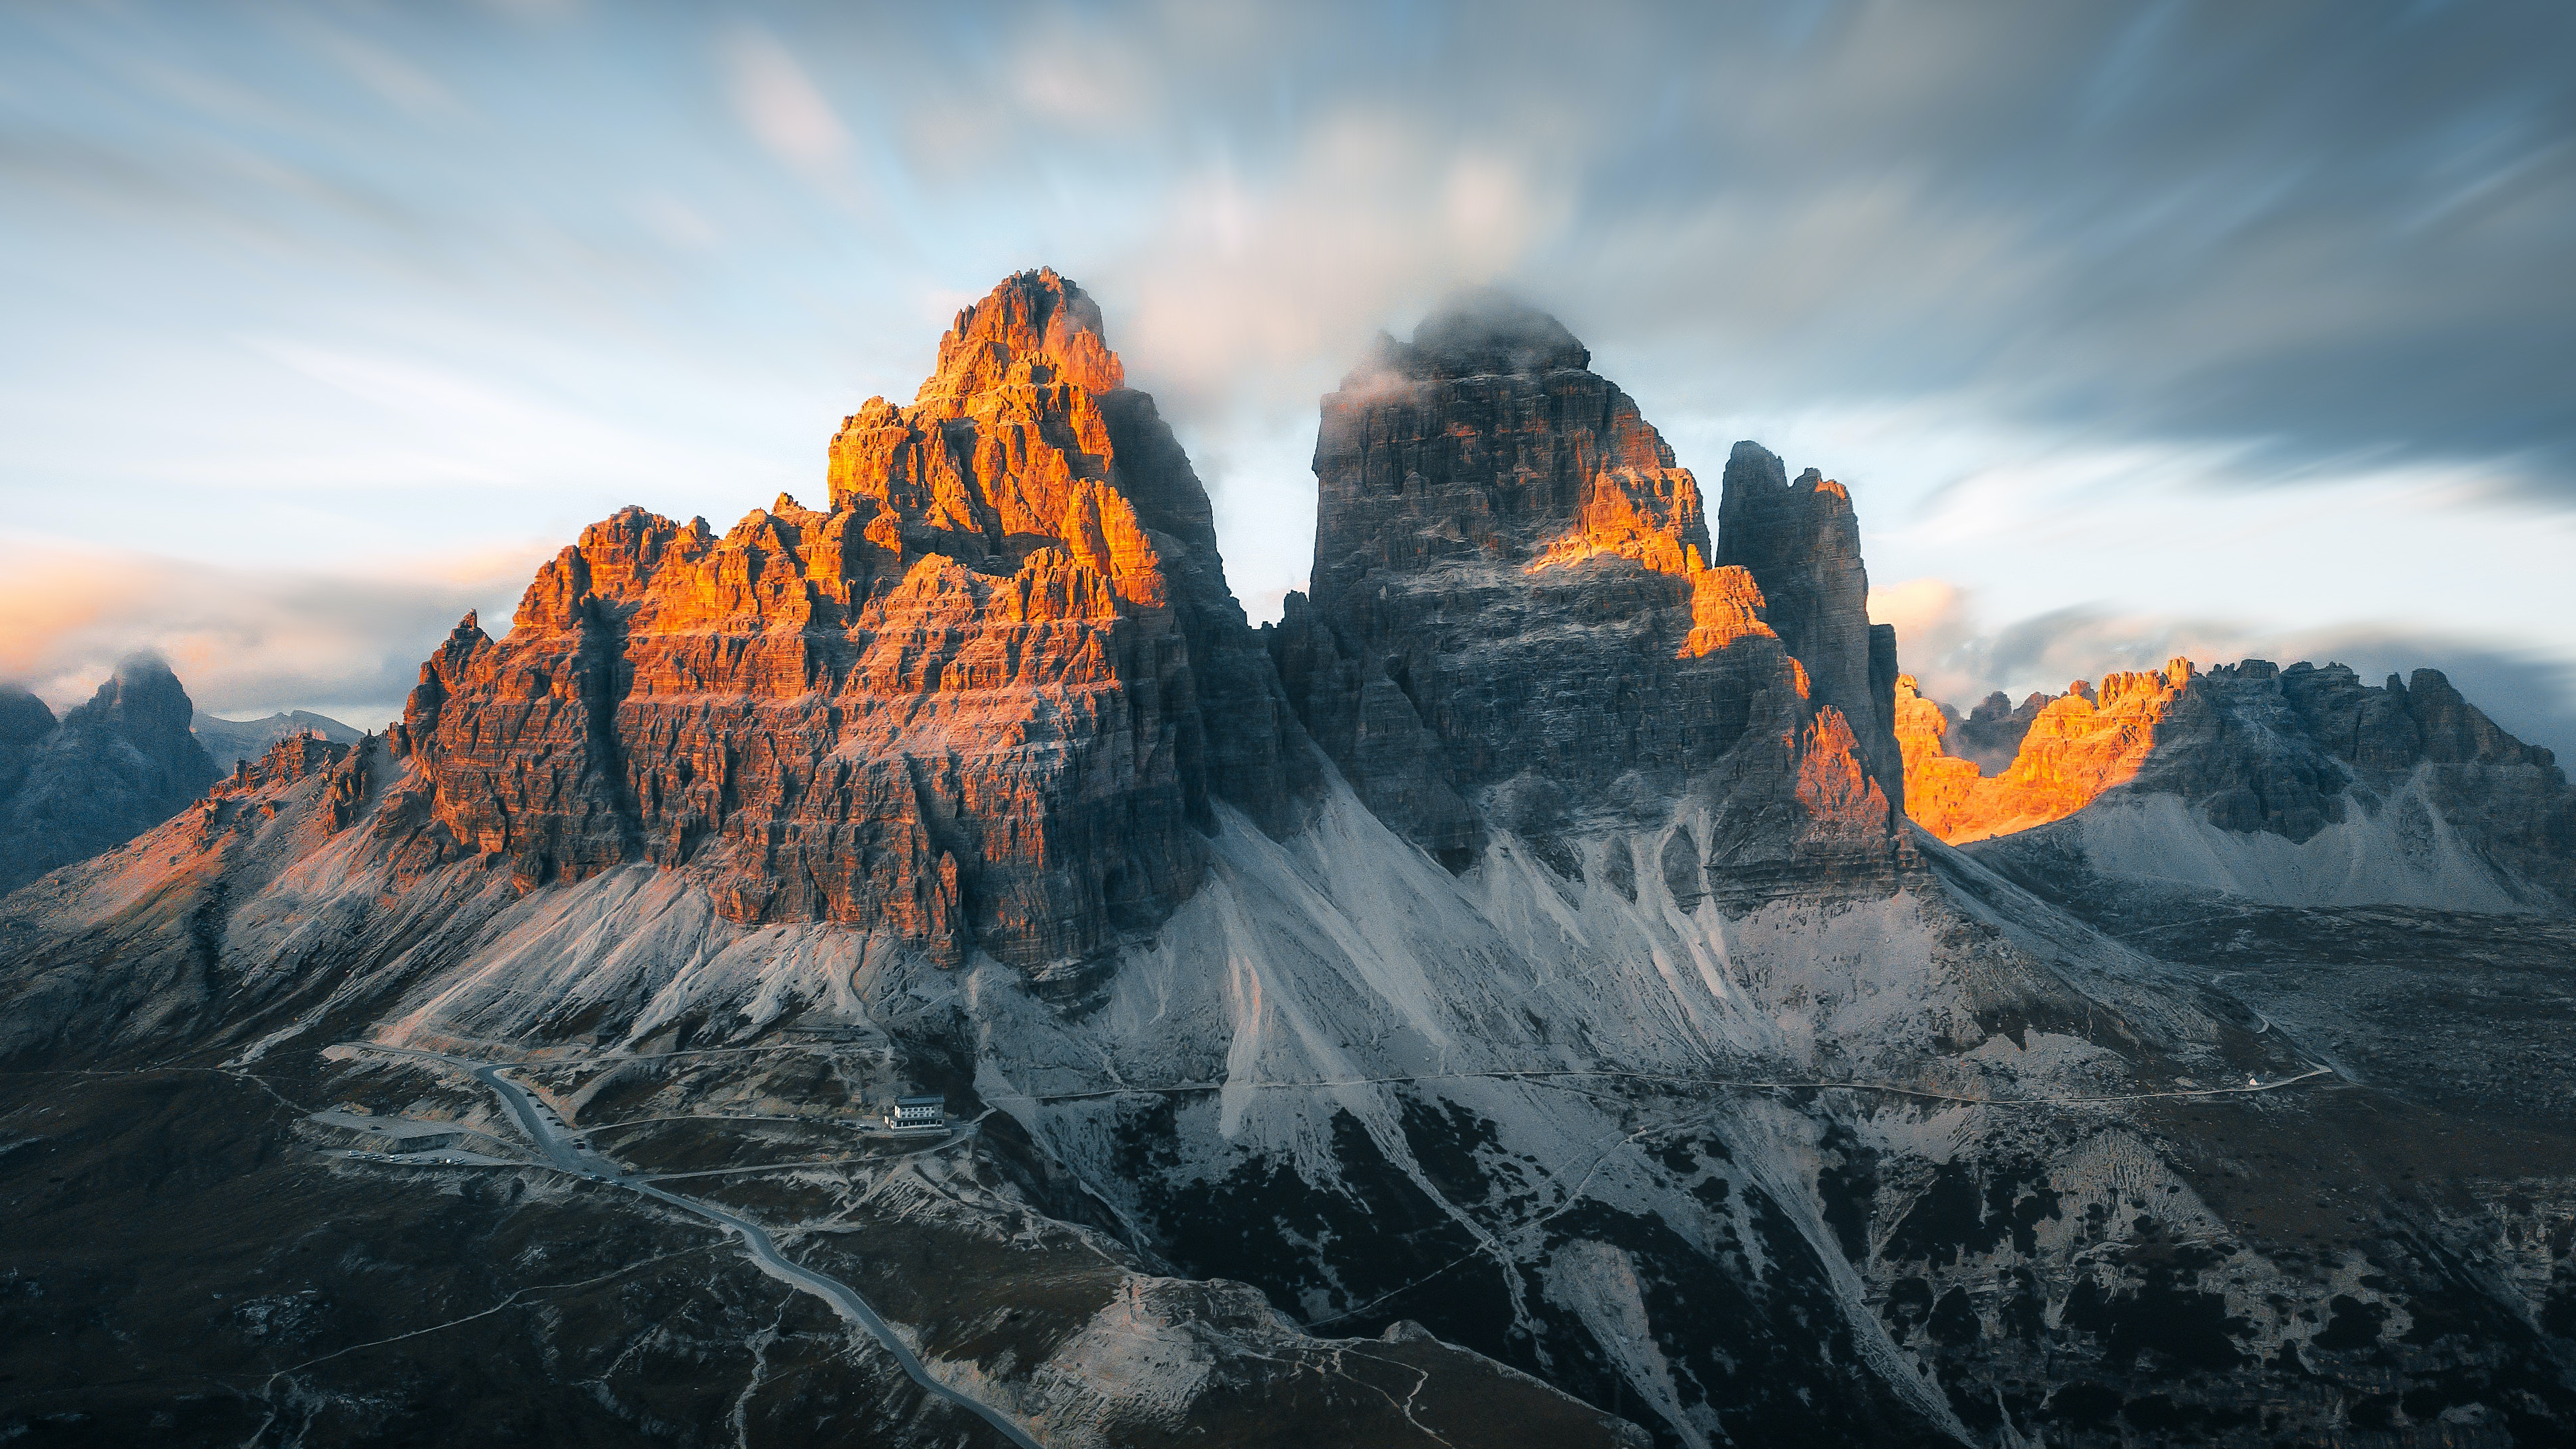 General 3840x2160 Italy Three Peaks of Lavaredo clouds sky mountains snow landscape nature